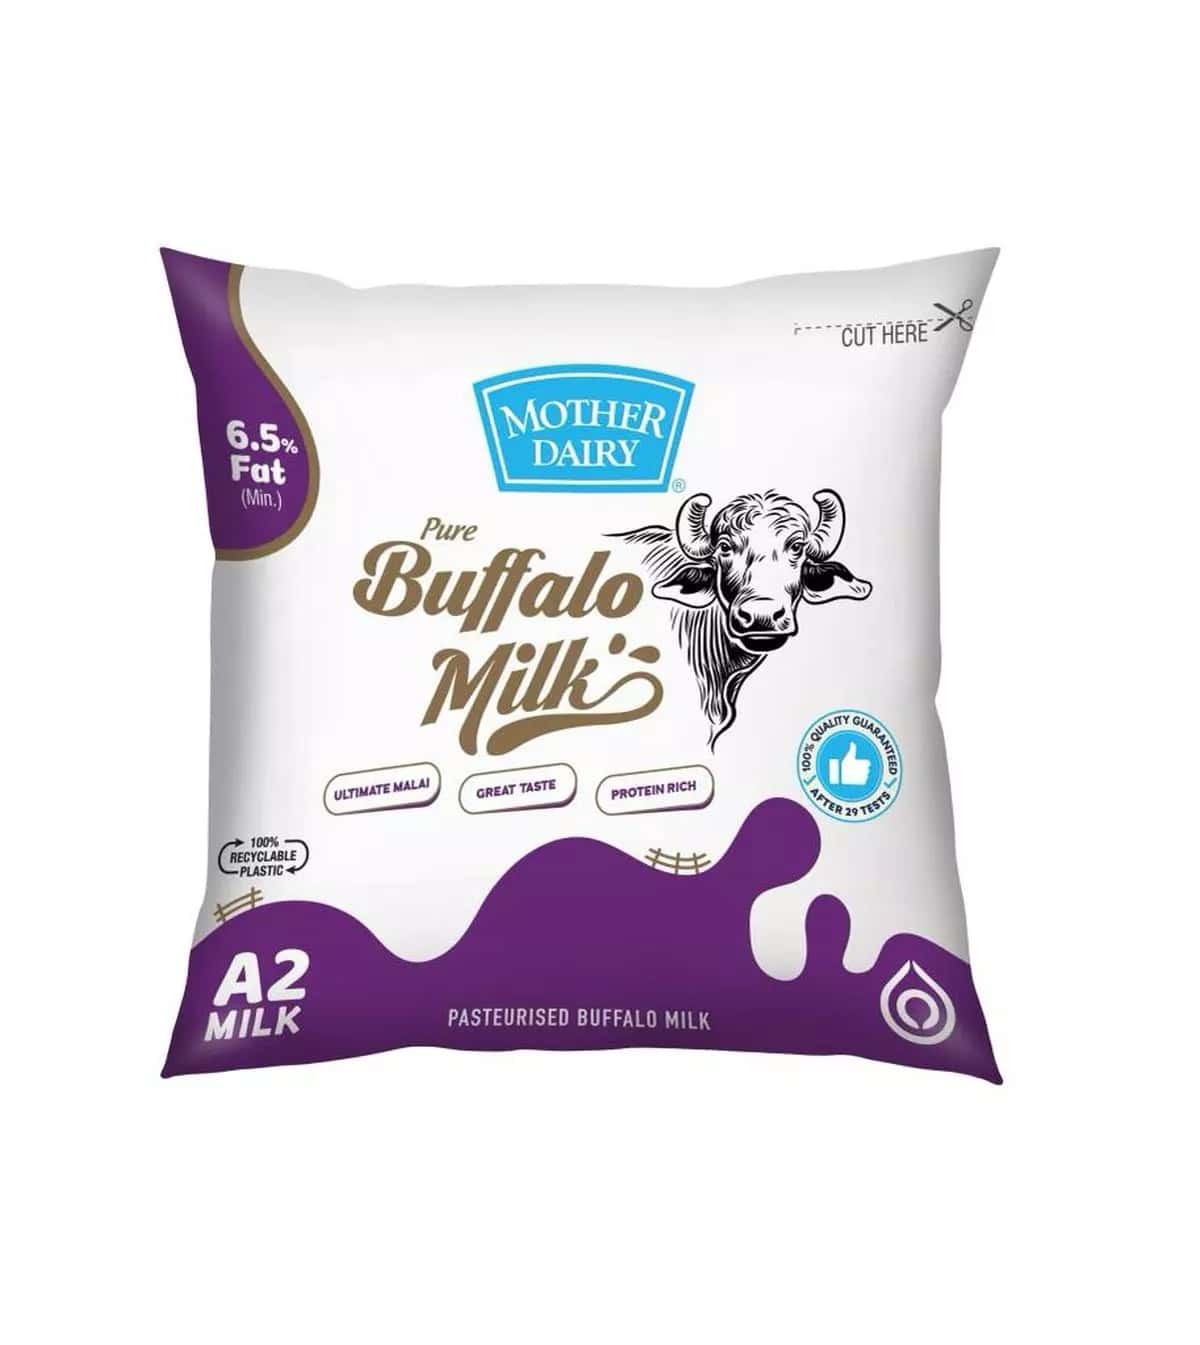 Mother Dairy launches pure buffalo milk variant